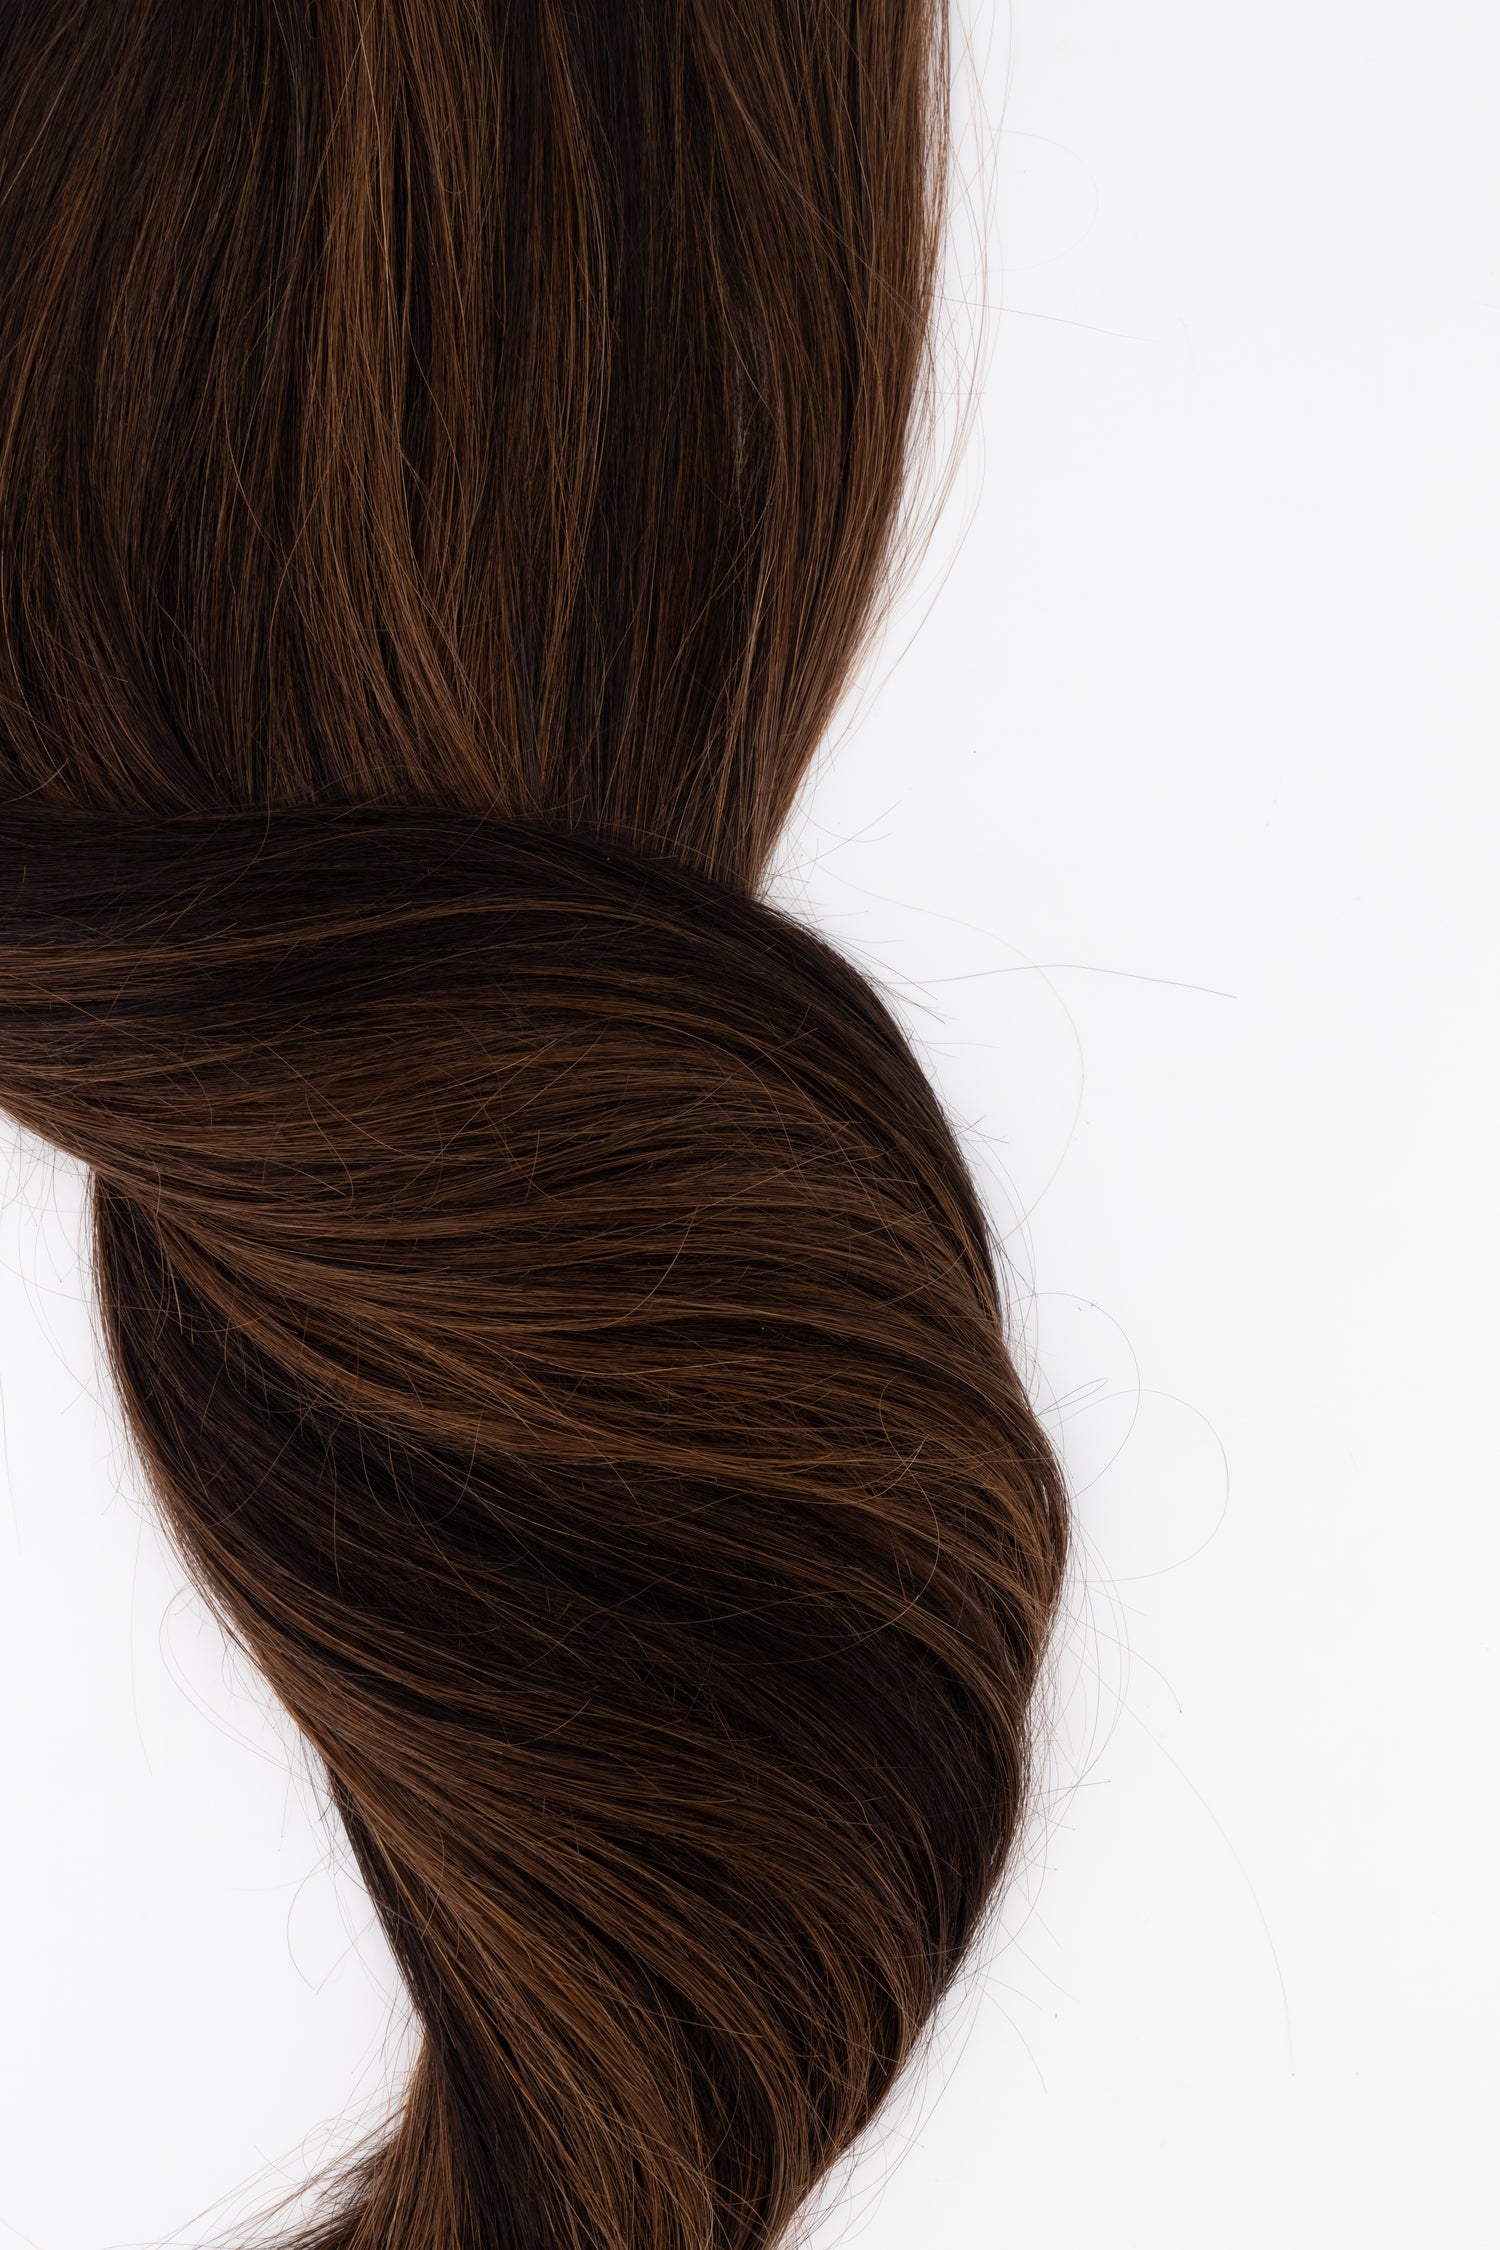 Frontrow clip-in ponytail extensions in mixed chocolate